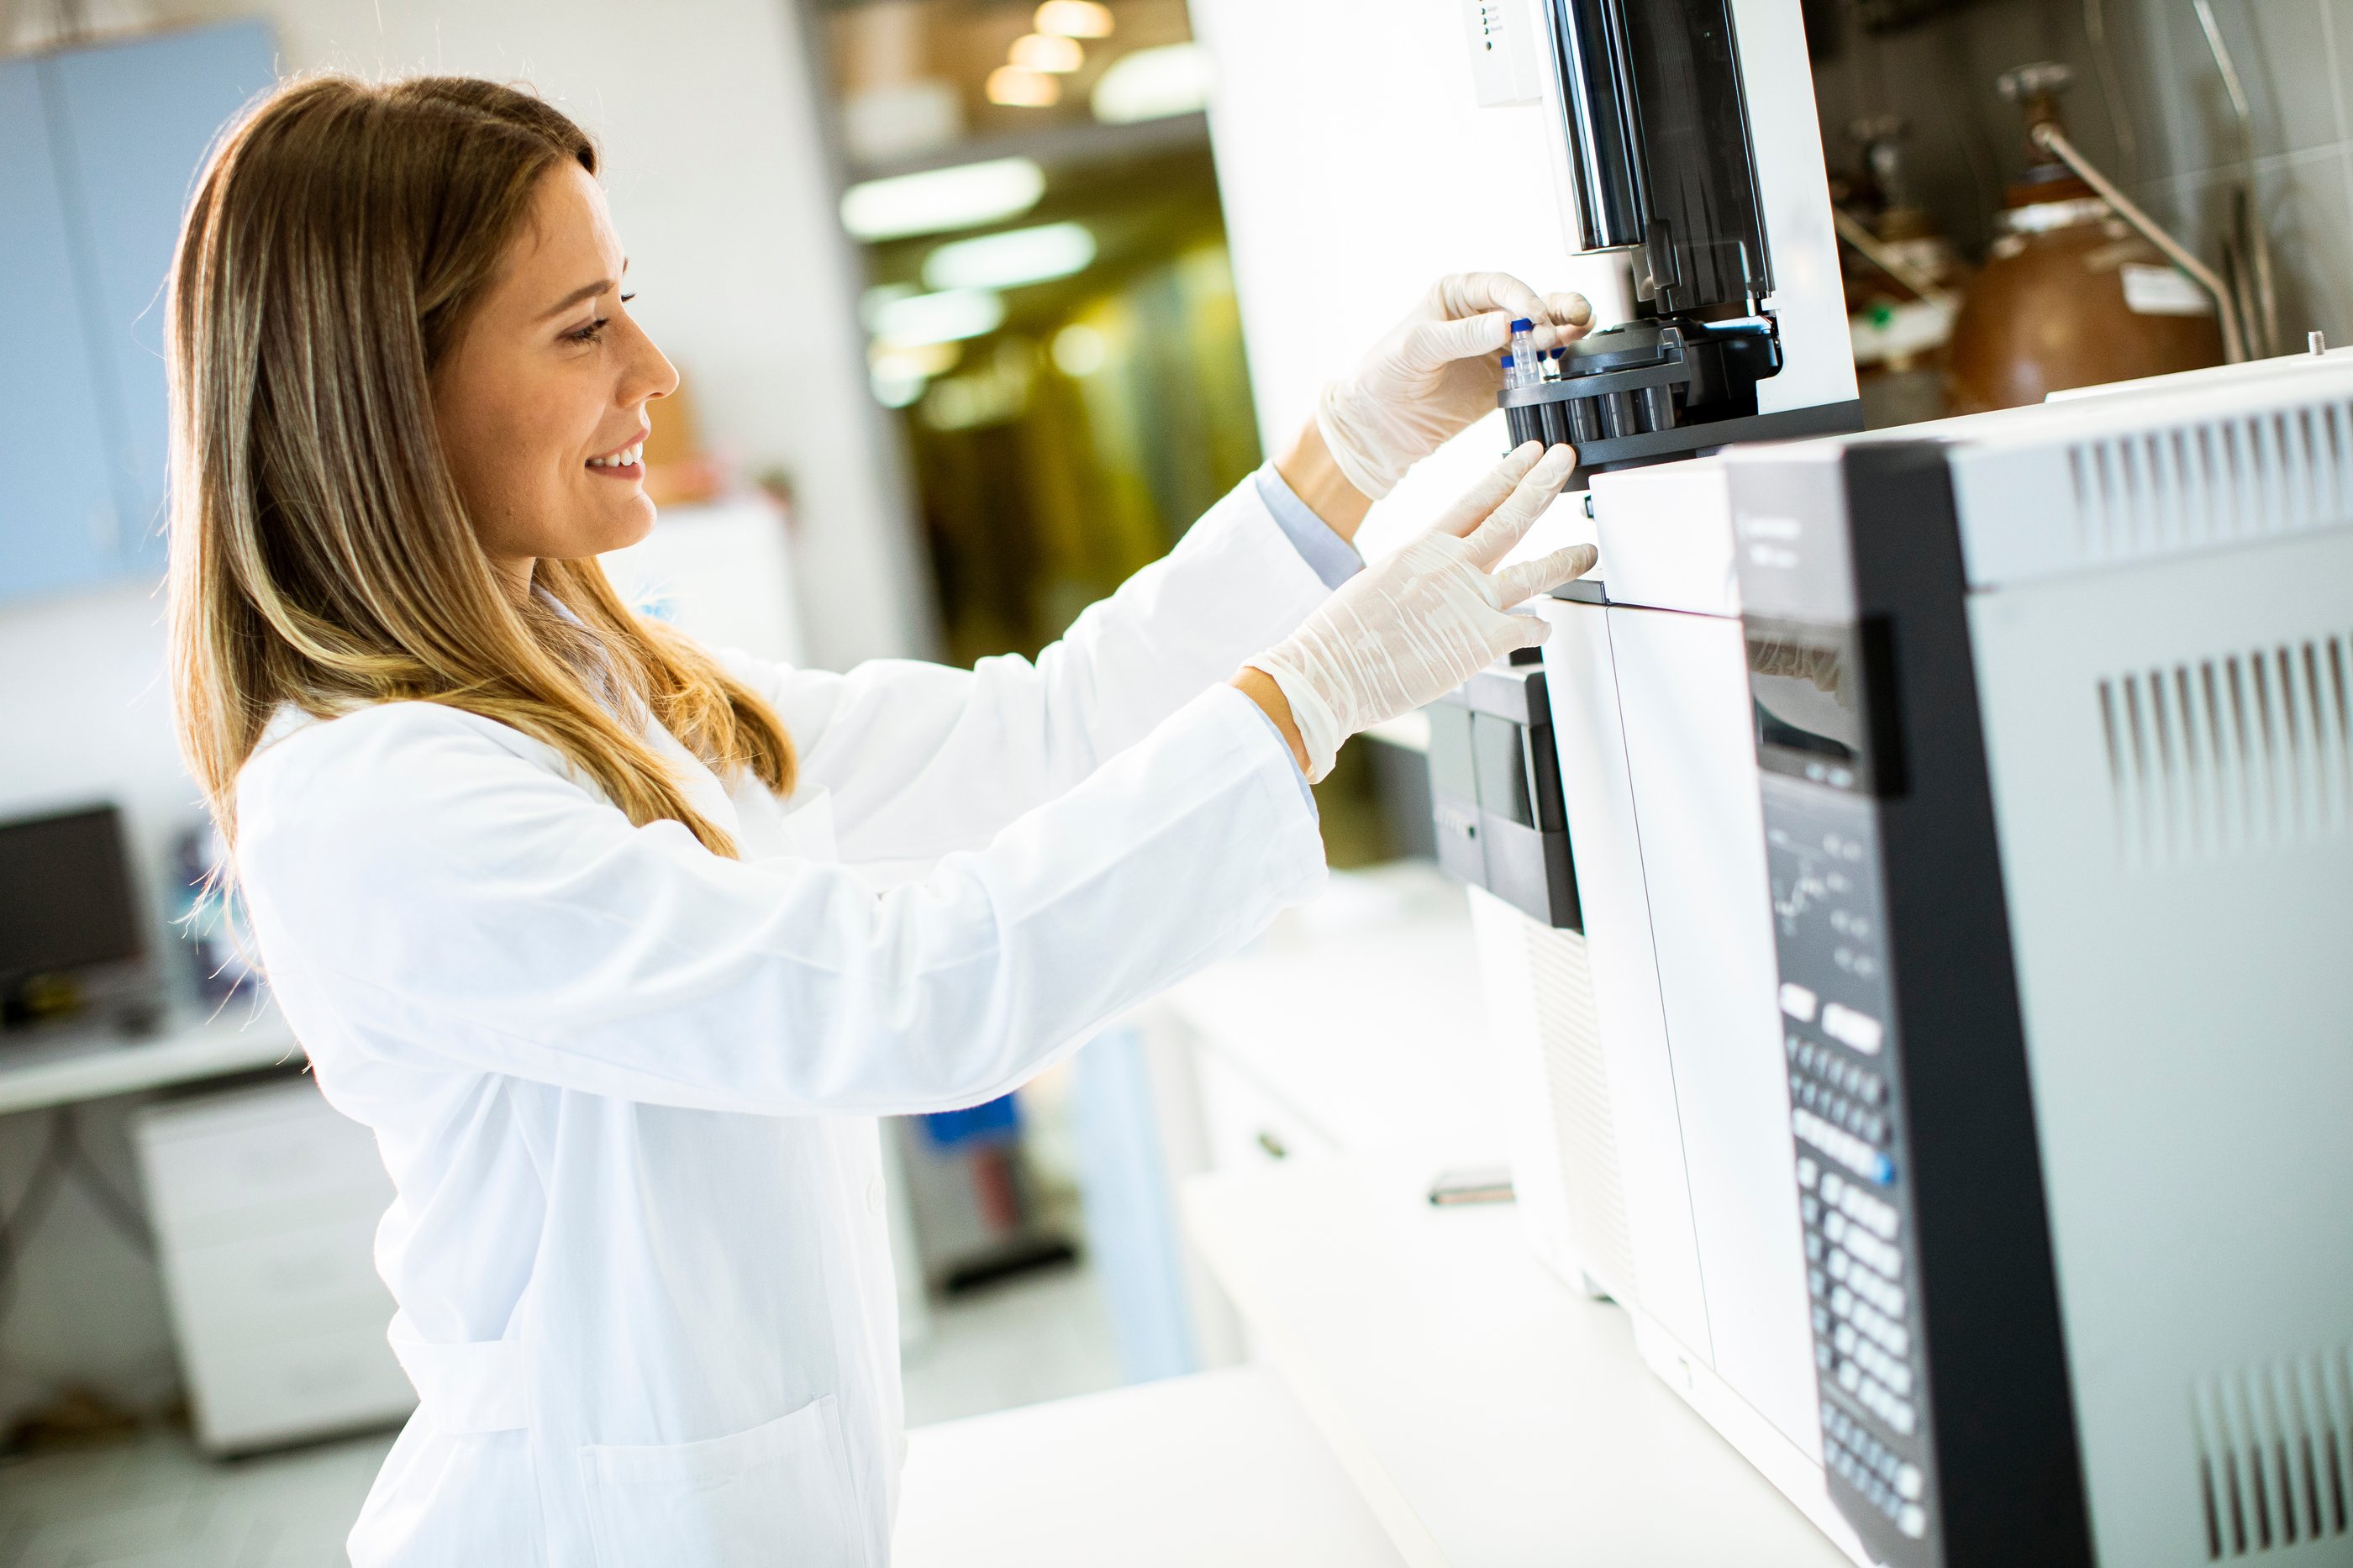 Smiling woman wearing white lab coat and white gloves is loading an automated purification system